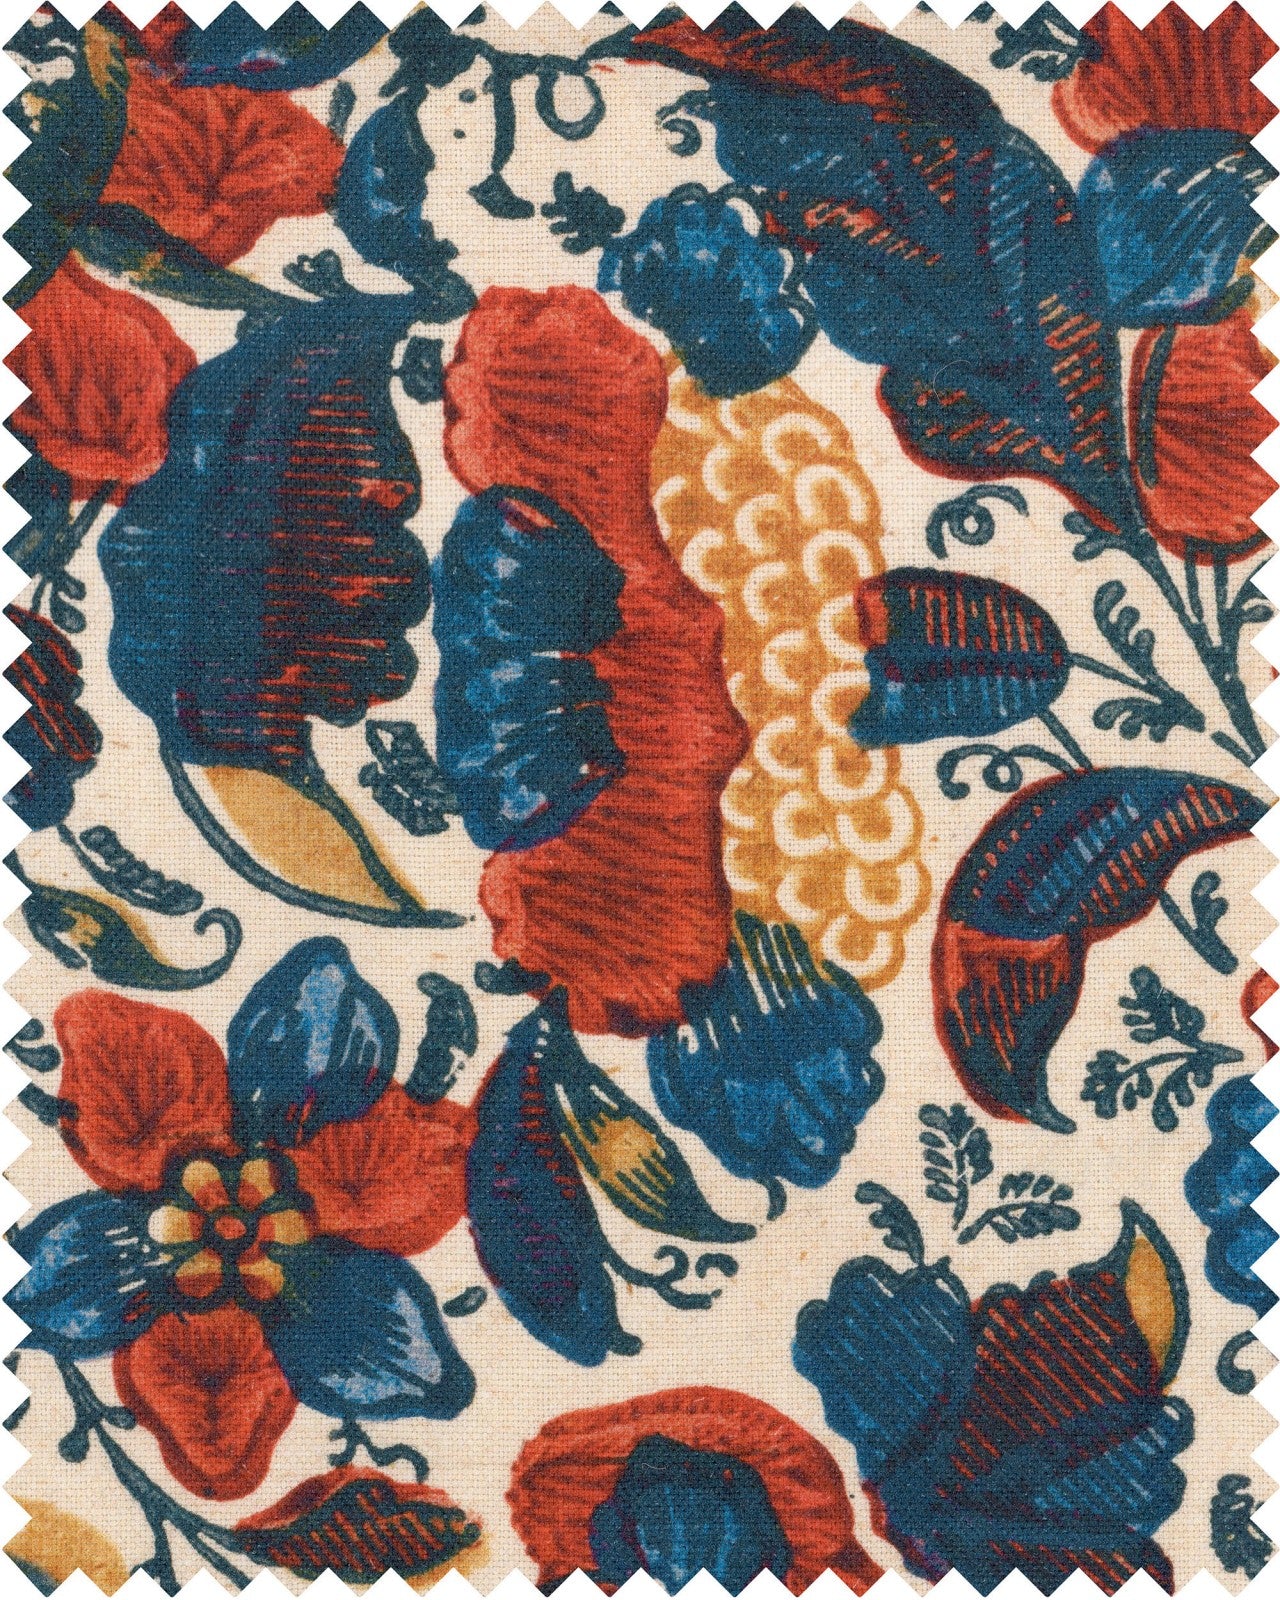 Remondini Floral fabric in blue red yellow taupe color - pattern number FB00075 - by Mind The Gap in the Woodstock collection